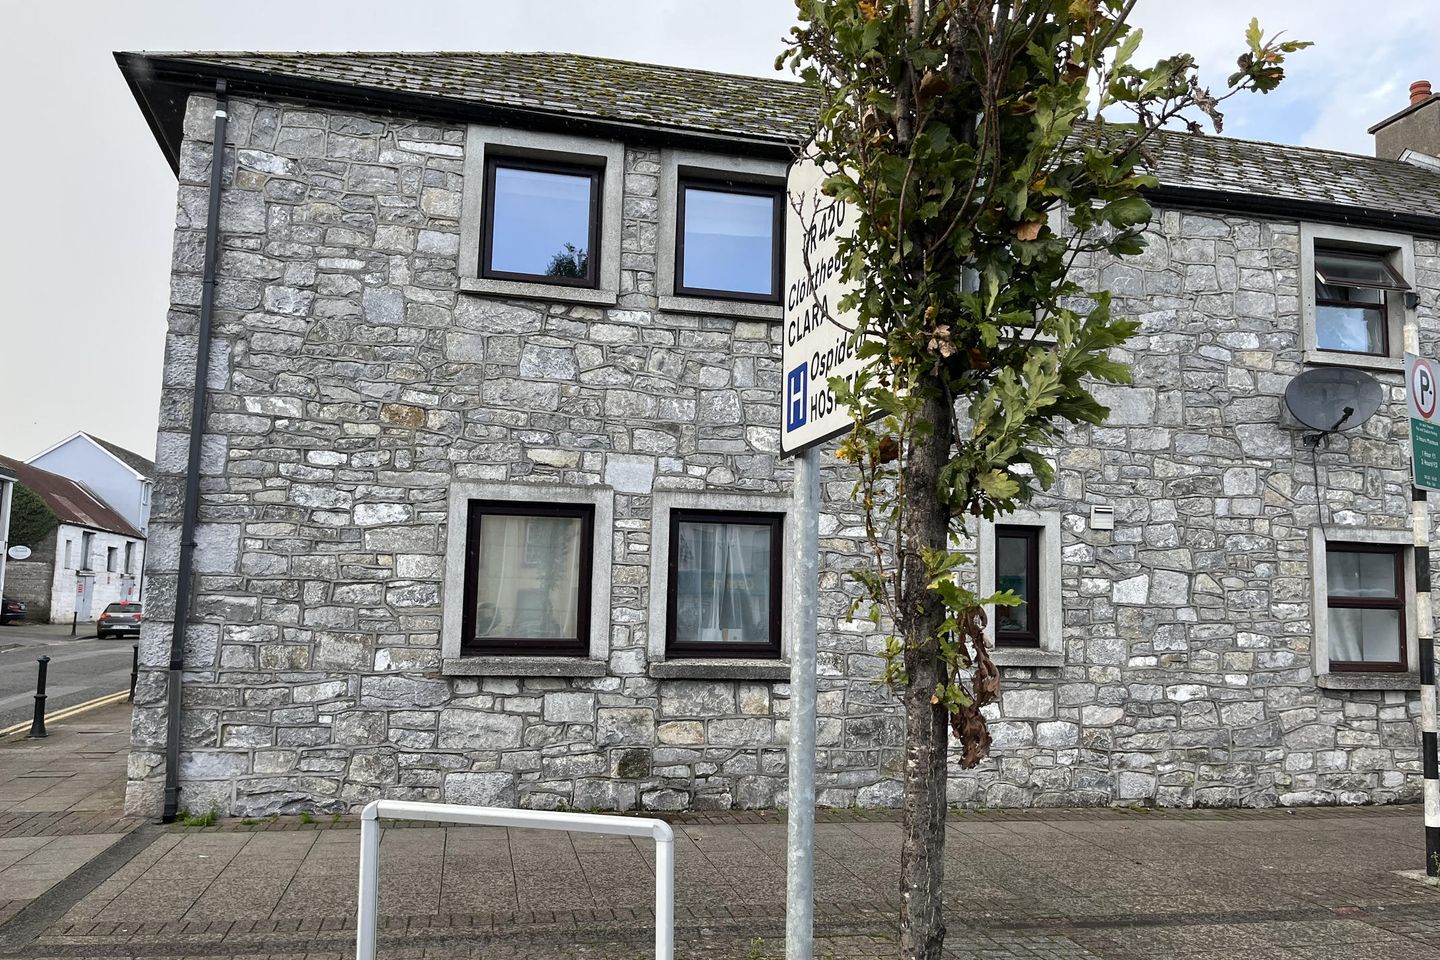 Apartment 5, The Granary, Tullamore, Co. Offaly